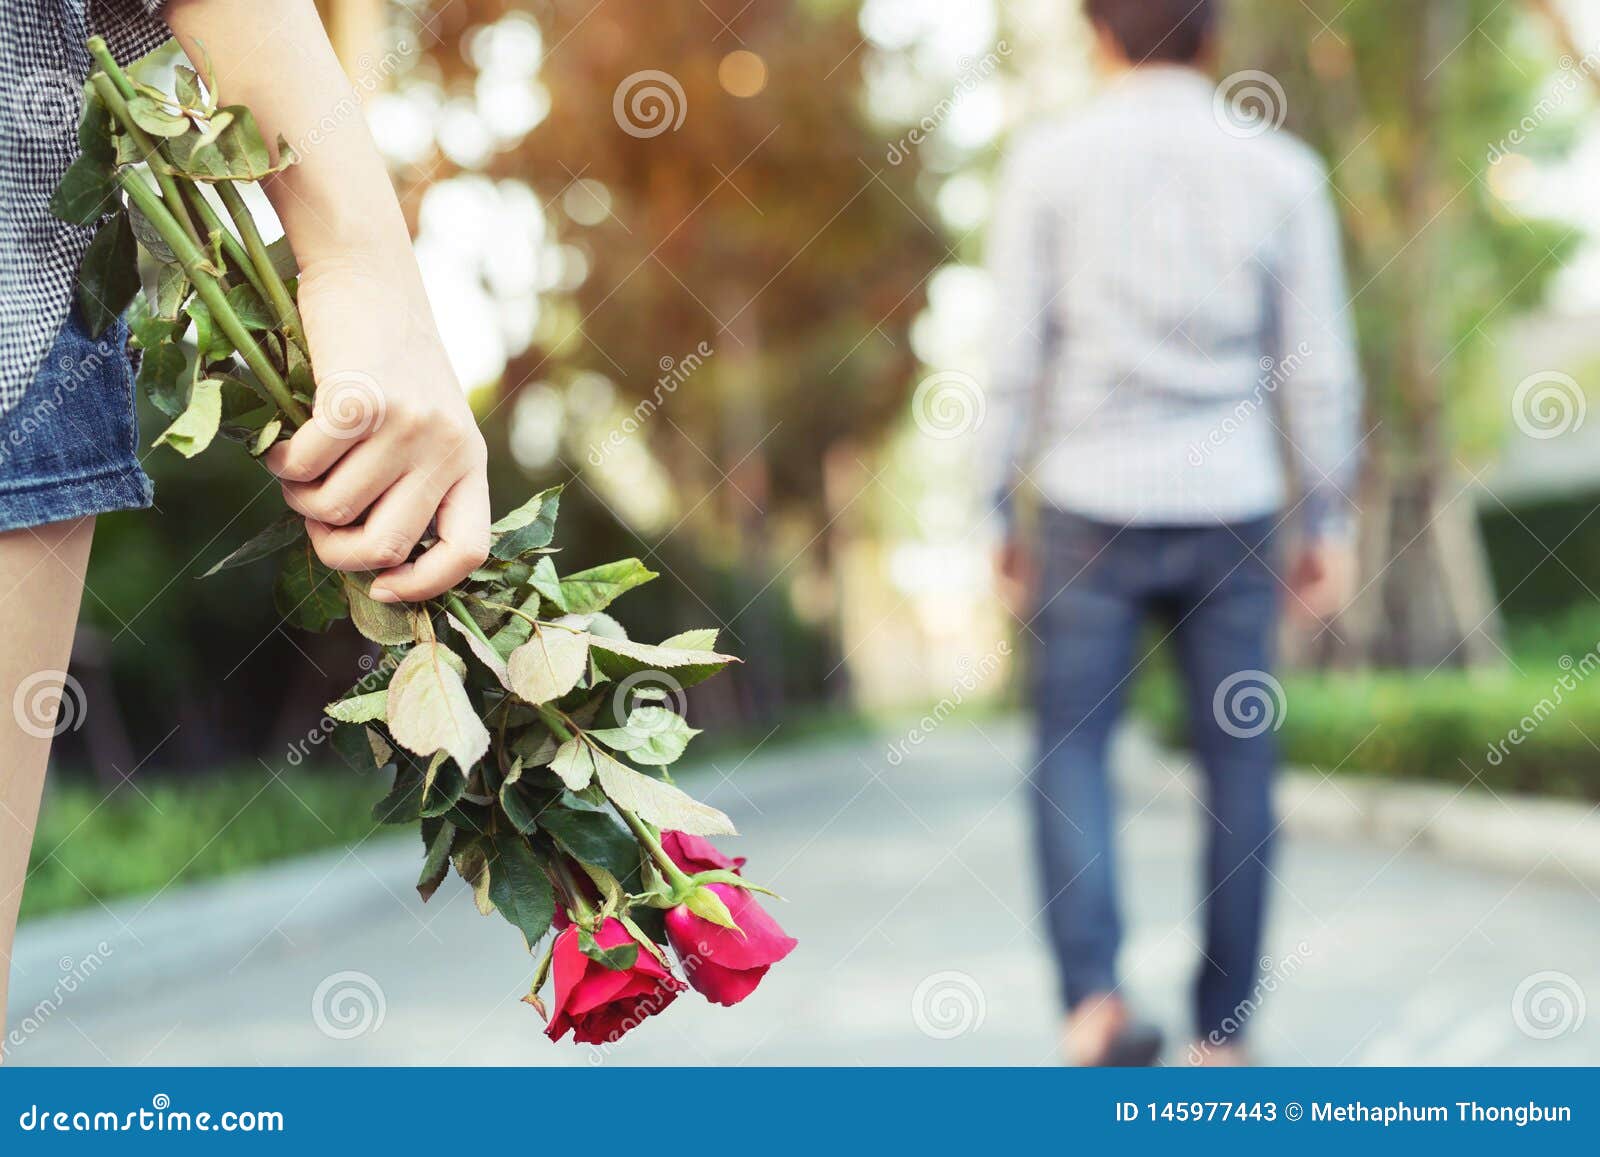 Young Woman Standing with a Red Rose on Hand Sadness Love in ...